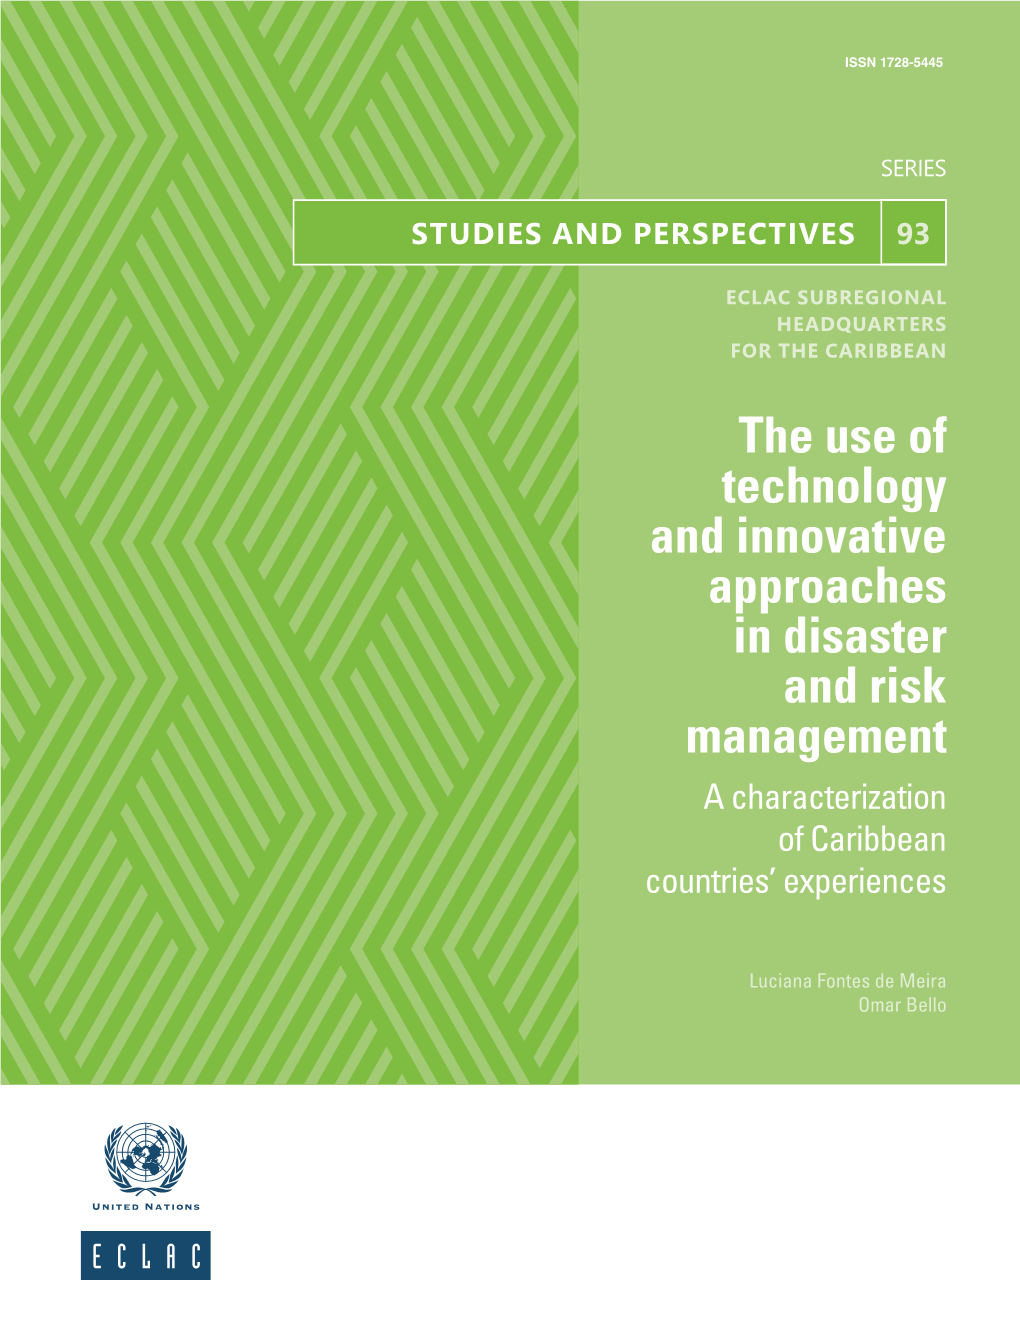 The Use of Technology and Innovetive Approaches in Disaster and Risk